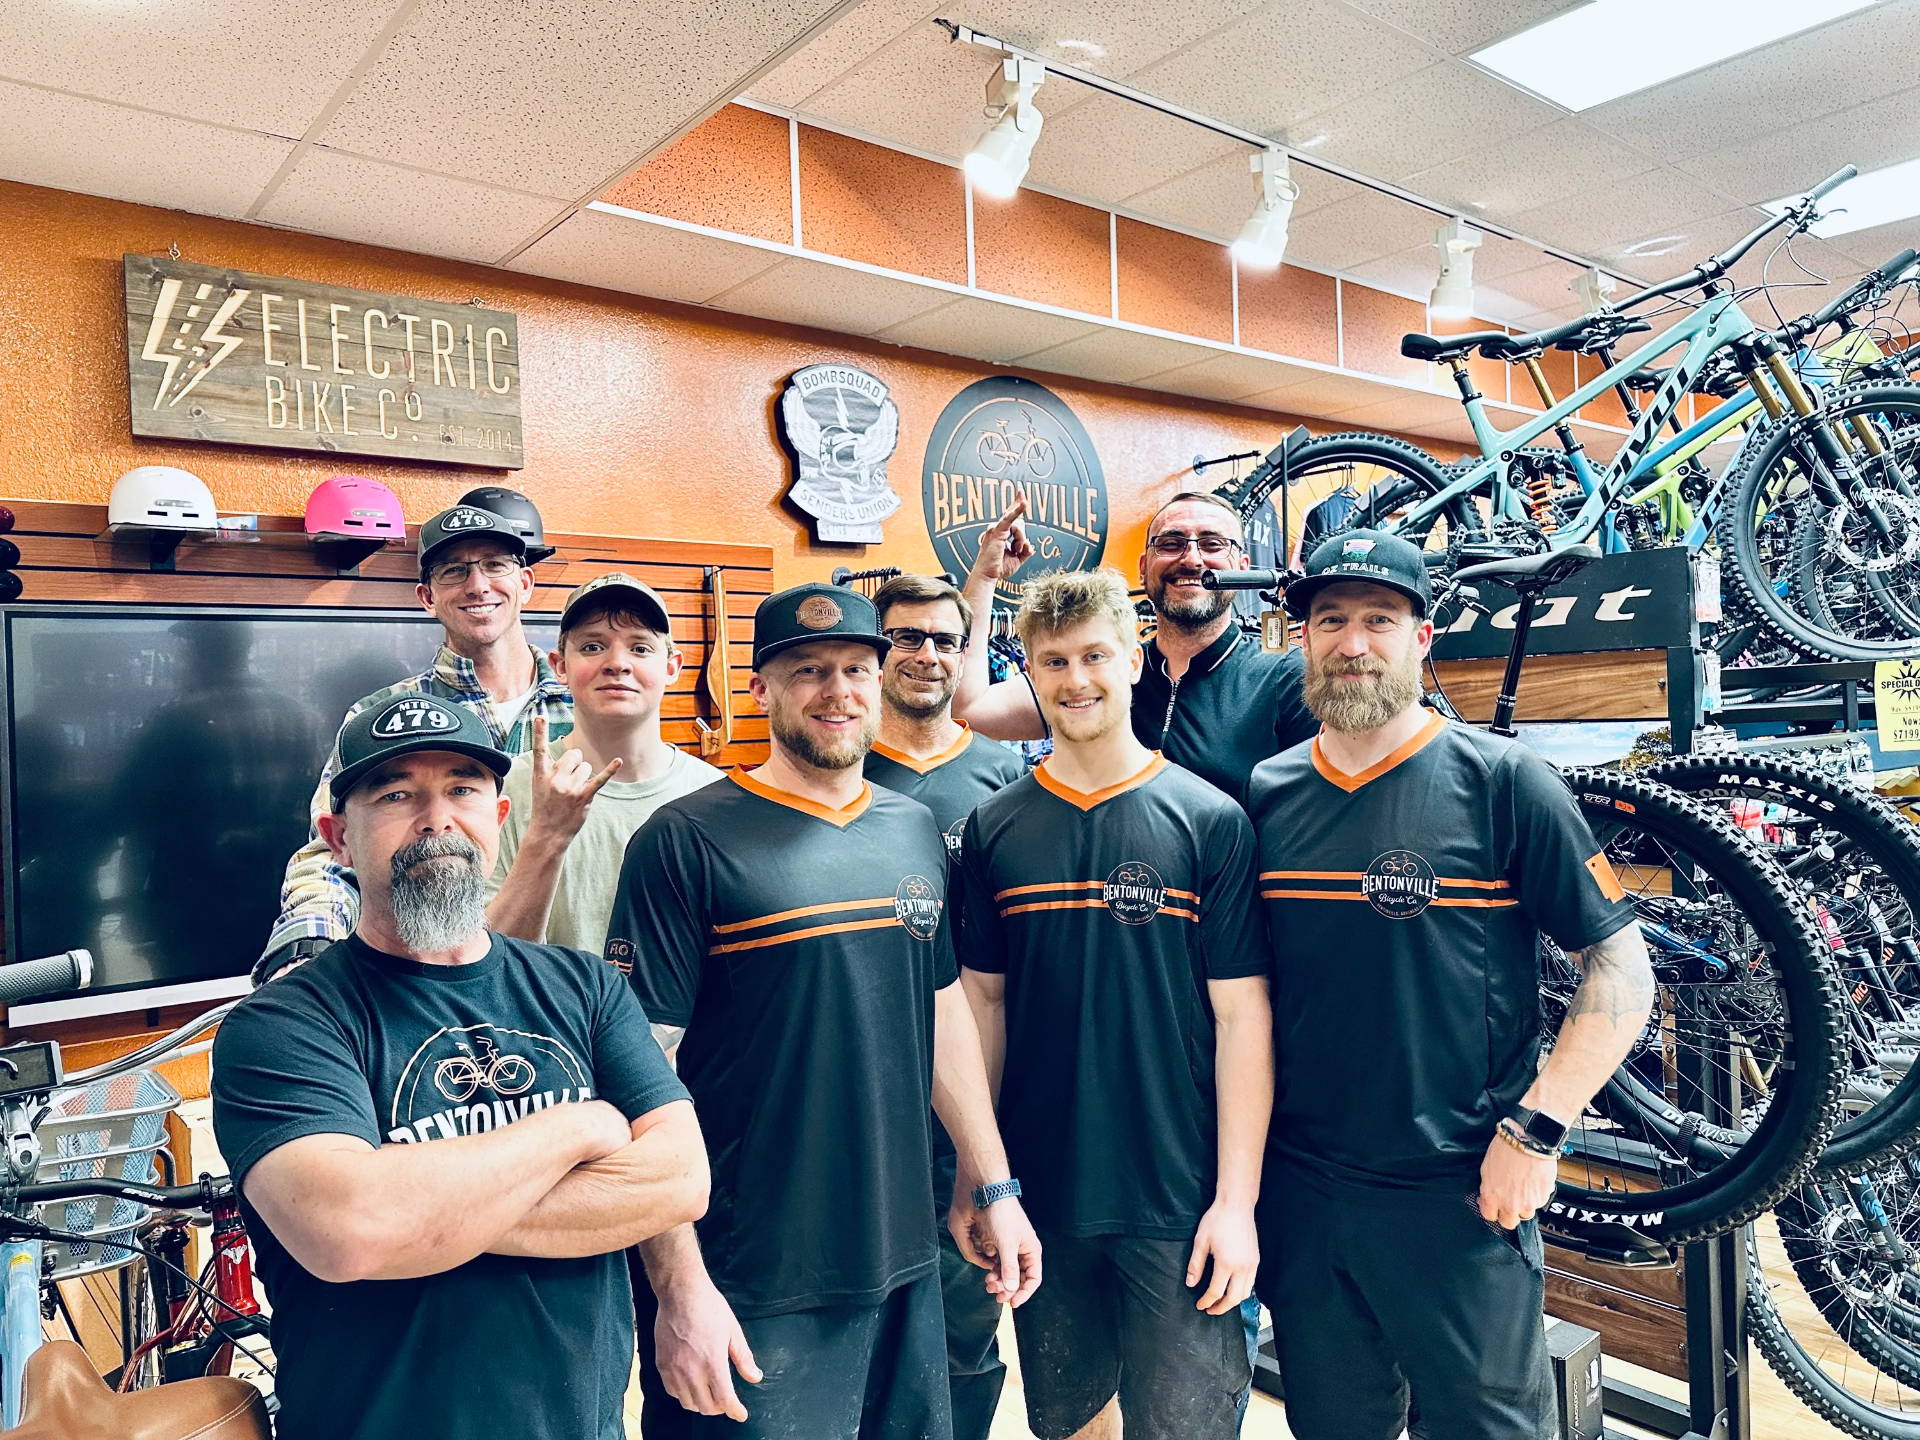 Staff of Bentonville Bicycle Company.